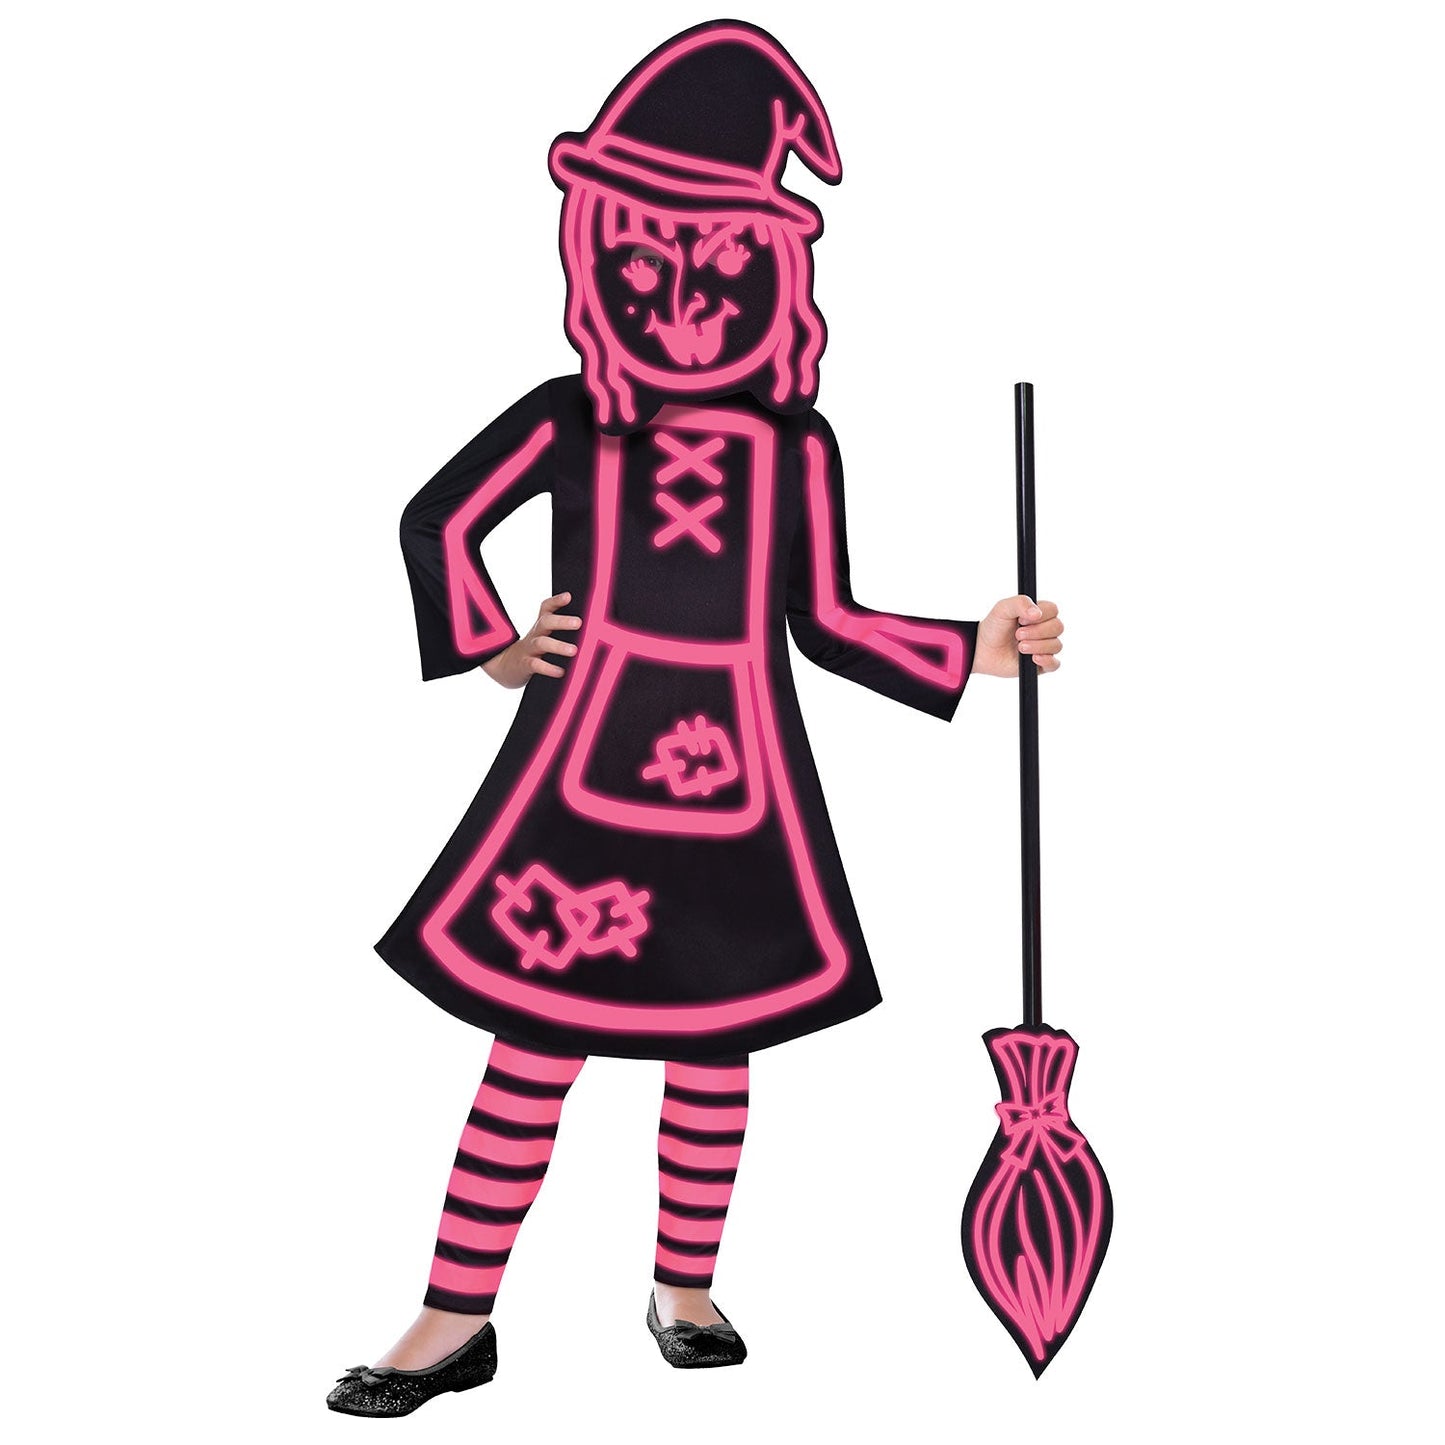 Glow in the Dark Stick Witch Costume includes dress, leggings, mask and broom